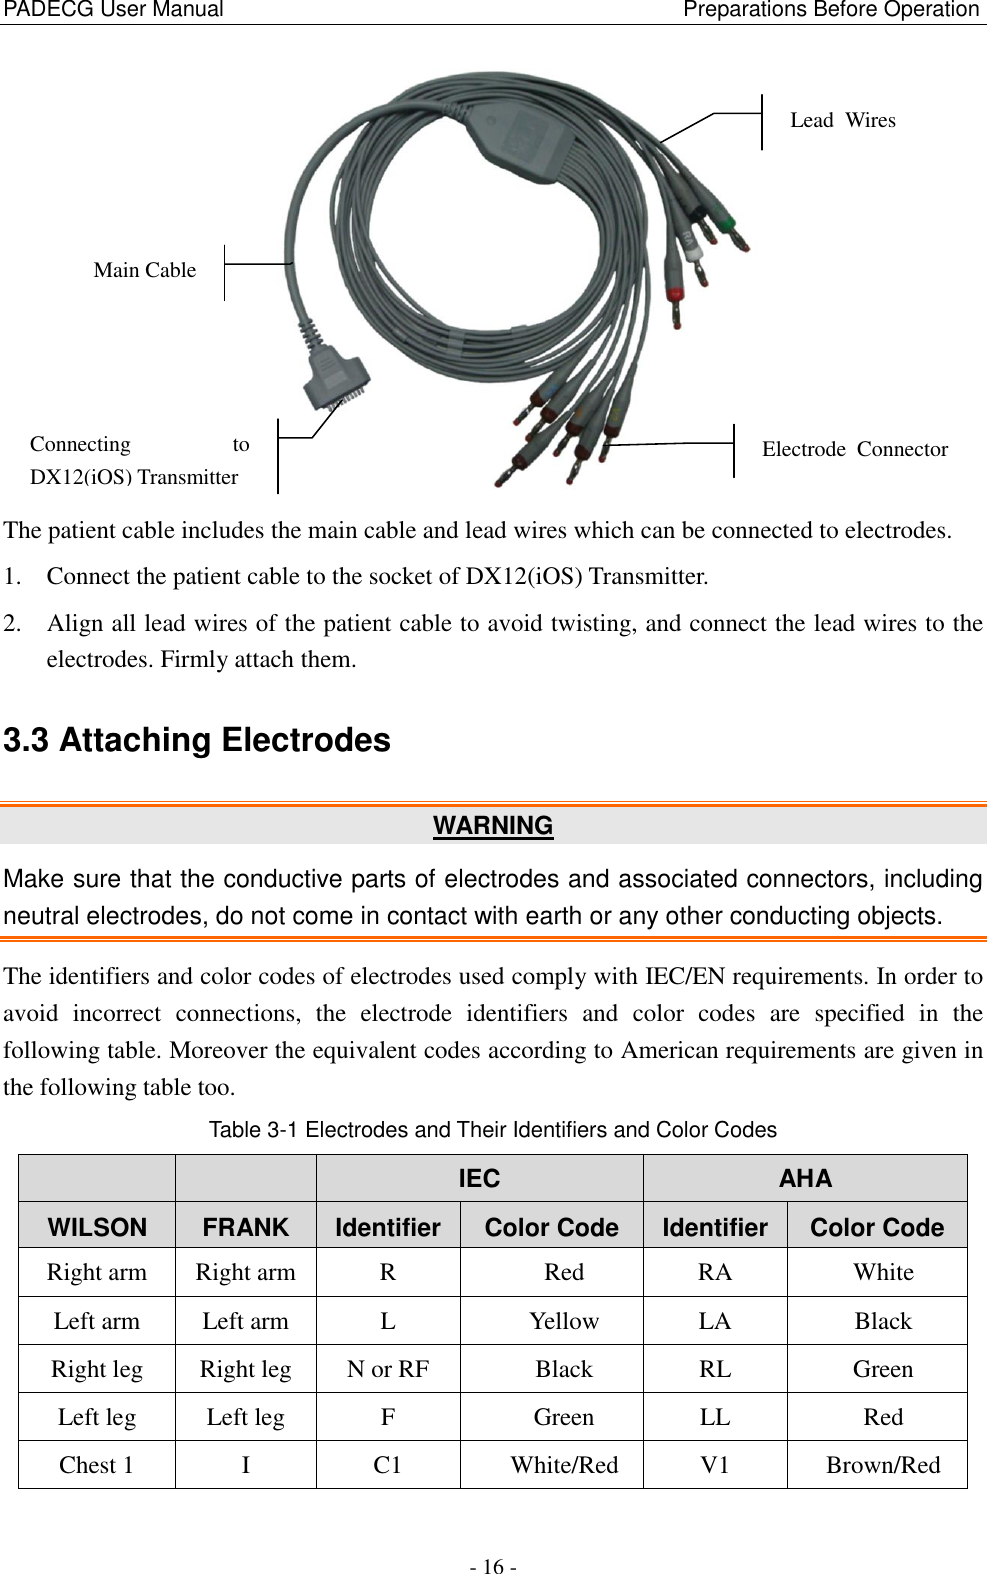 PADECG User Manual                                                                         Preparations Before Operation - 16 -  The patient cable includes the main cable and lead wires which can be connected to electrodes. 1. Connect the patient cable to the socket of DX12(iOS) Transmitter. 2. Align all lead wires of the patient cable to avoid twisting, and connect the lead wires to the electrodes. Firmly attach them. 3.3 Attaching Electrodes WARNING Make sure that the conductive parts of electrodes and associated connectors, including neutral electrodes, do not come in contact with earth or any other conducting objects. The identifiers and color codes of electrodes used comply with IEC/EN requirements. In order to avoid  incorrect  connections,  the  electrode  identifiers  and  color  codes  are  specified  in  the following table. Moreover the equivalent codes according to American requirements are given in the following table too. Table 3-1 Electrodes and Their Identifiers and Color Codes   IEC AHA WILSON FRANK Identifier Color Code Identifier Color Code Right arm Right arm R Red RA White Left arm Left arm L Yellow LA Black Right leg Right leg N or RF Black RL Green Left leg Left leg F Green LL Red Chest 1 I C1 White/Red V1 Brown/Red Electrode  Connector  Lead  Wires  Connecting  to DX12(iOS) Transmitter Main Cable  